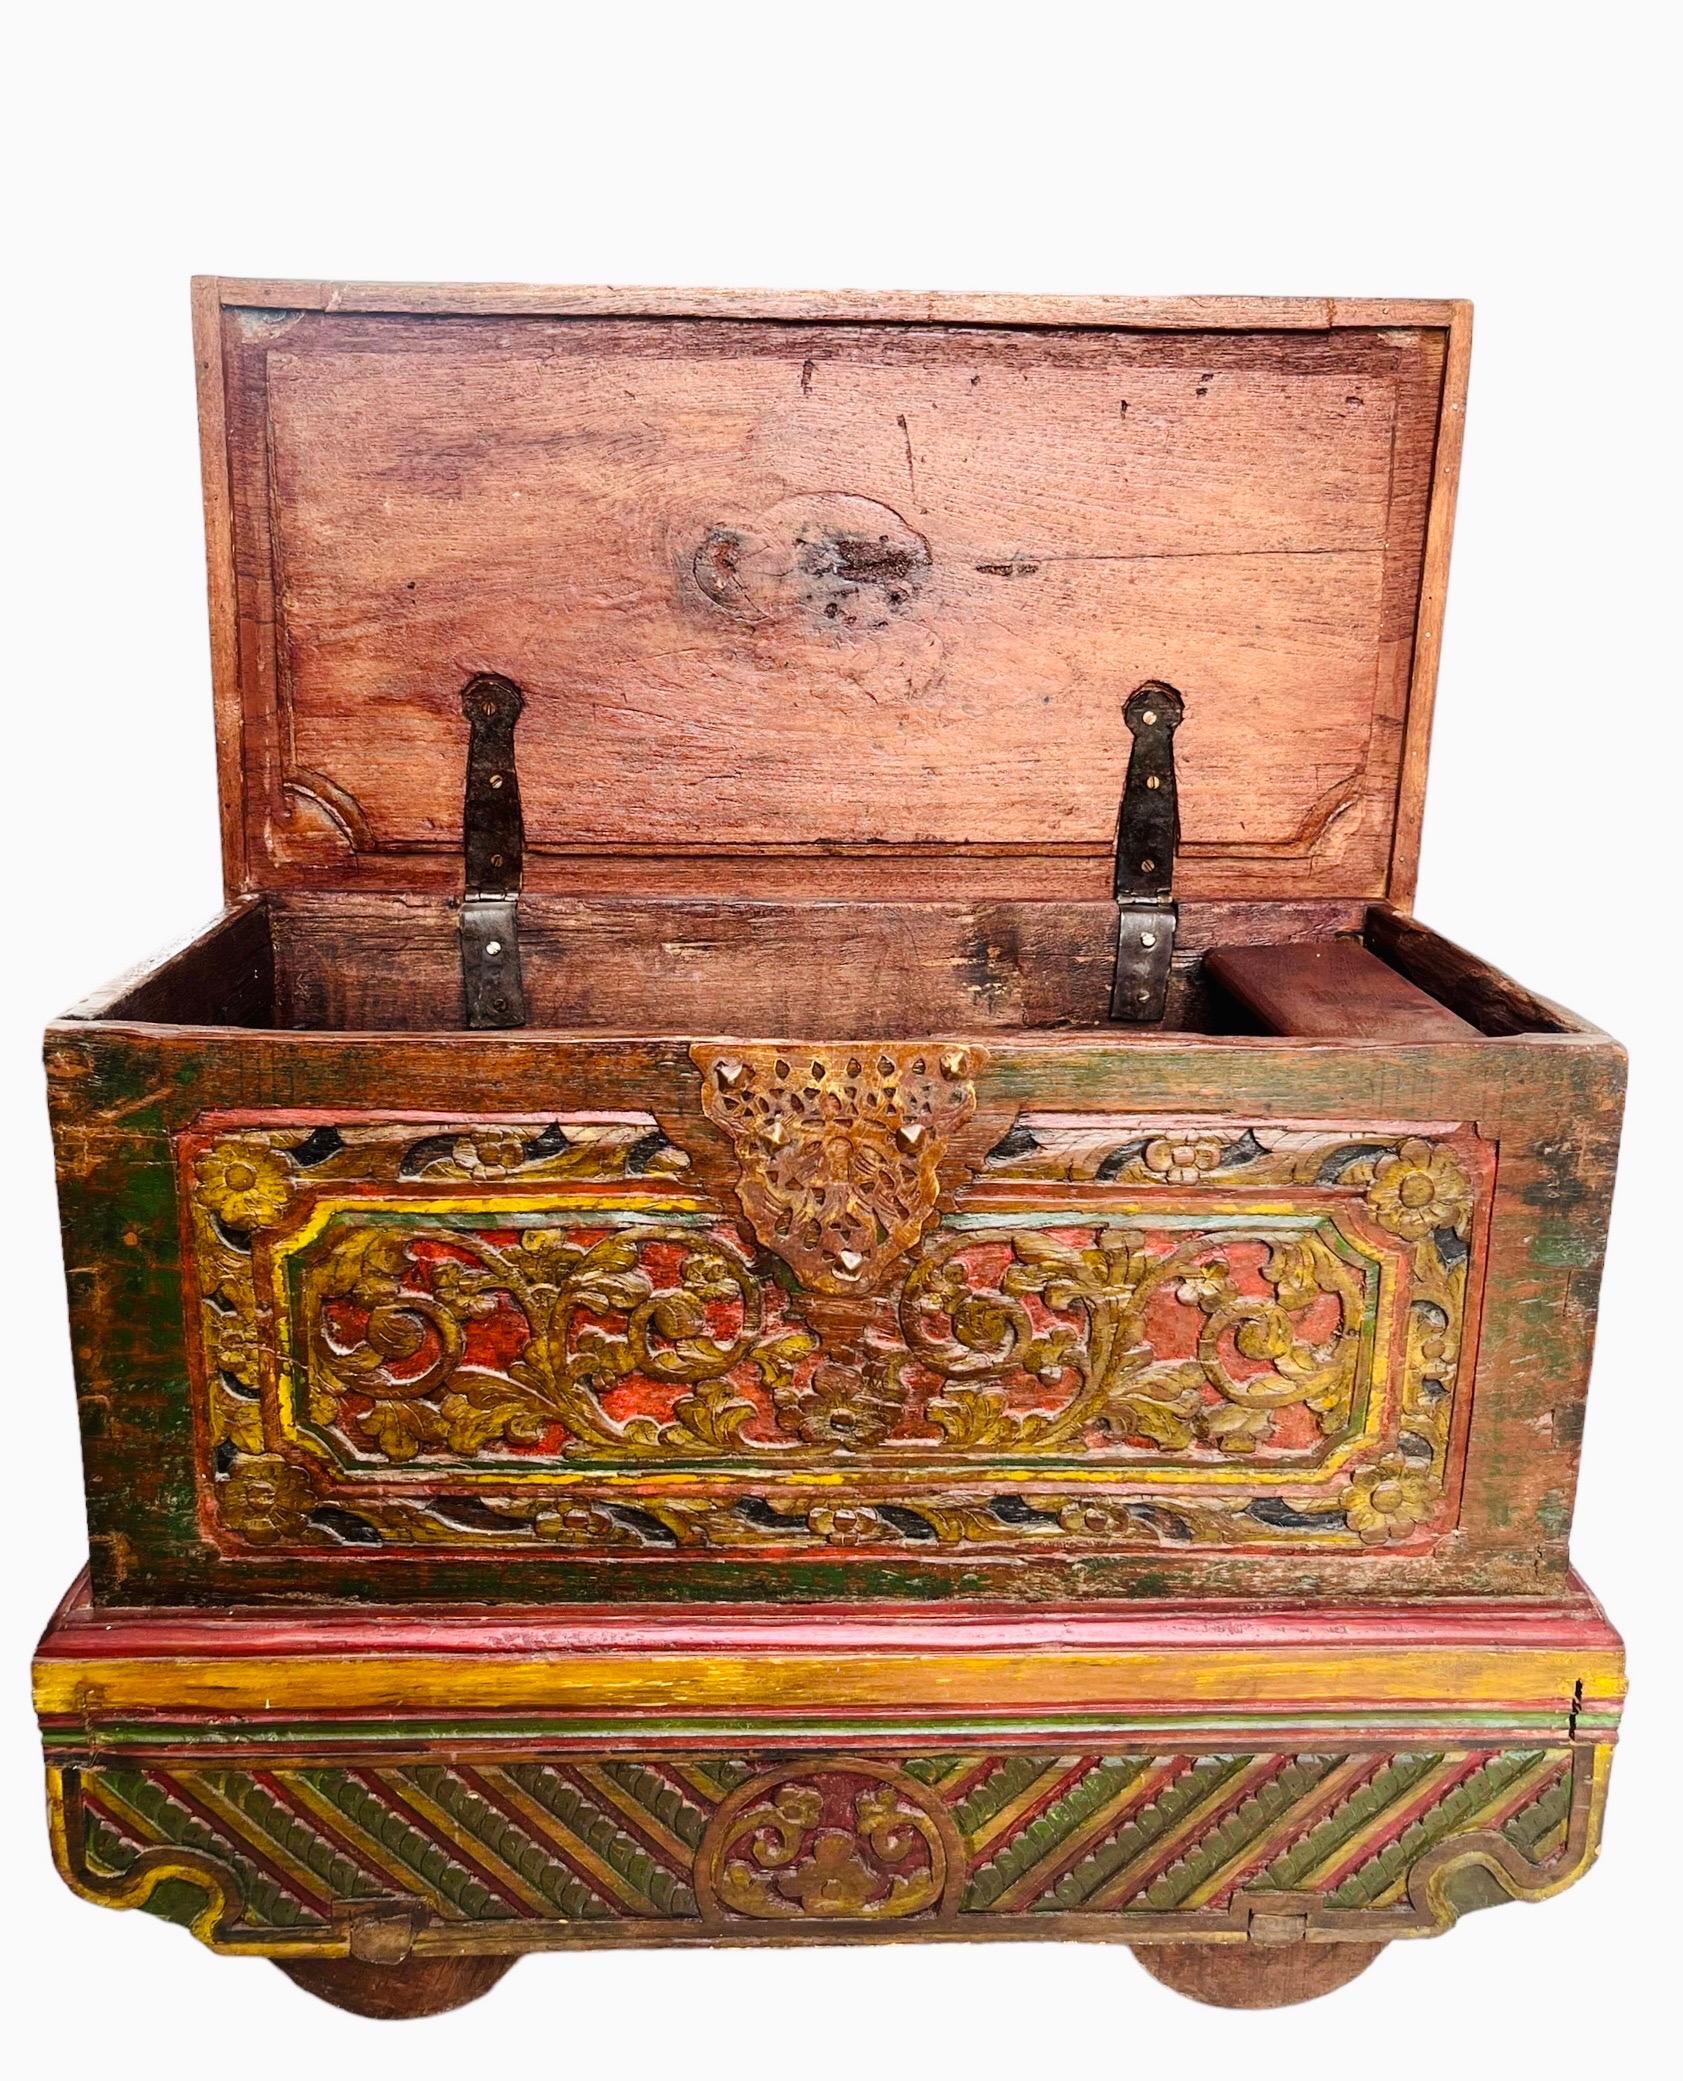 19th Century Merchant's Chest on wheels in carved and painted wood - Madura Indonesia 19th For Sale